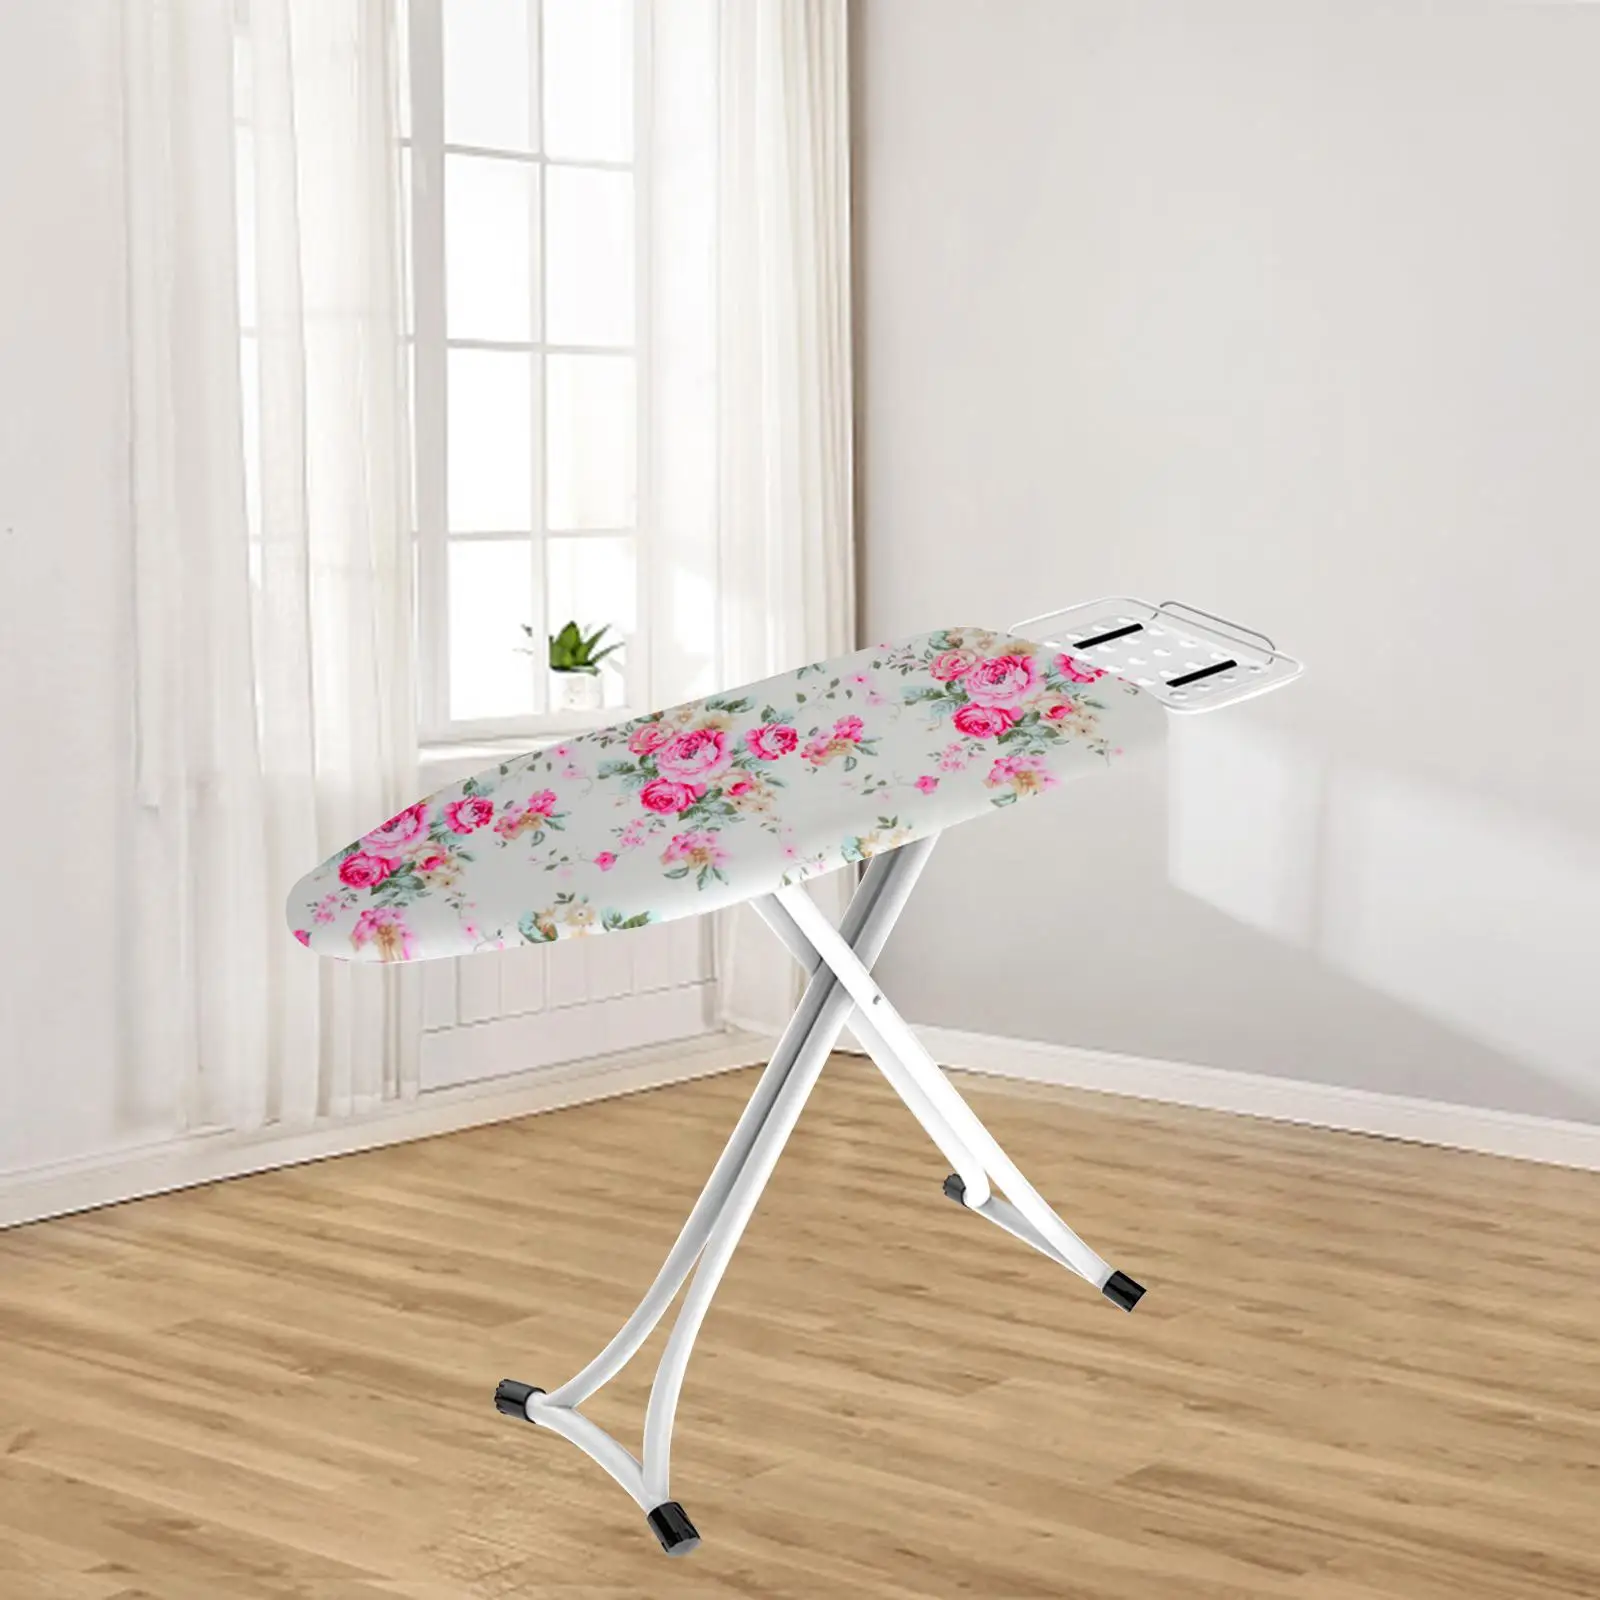 Cotton Ironing Board Cover 120Cmx41cm Stain Resistant Blanket Pad Heat Insulation Ironing Table Cover Protector Laundry Supplies